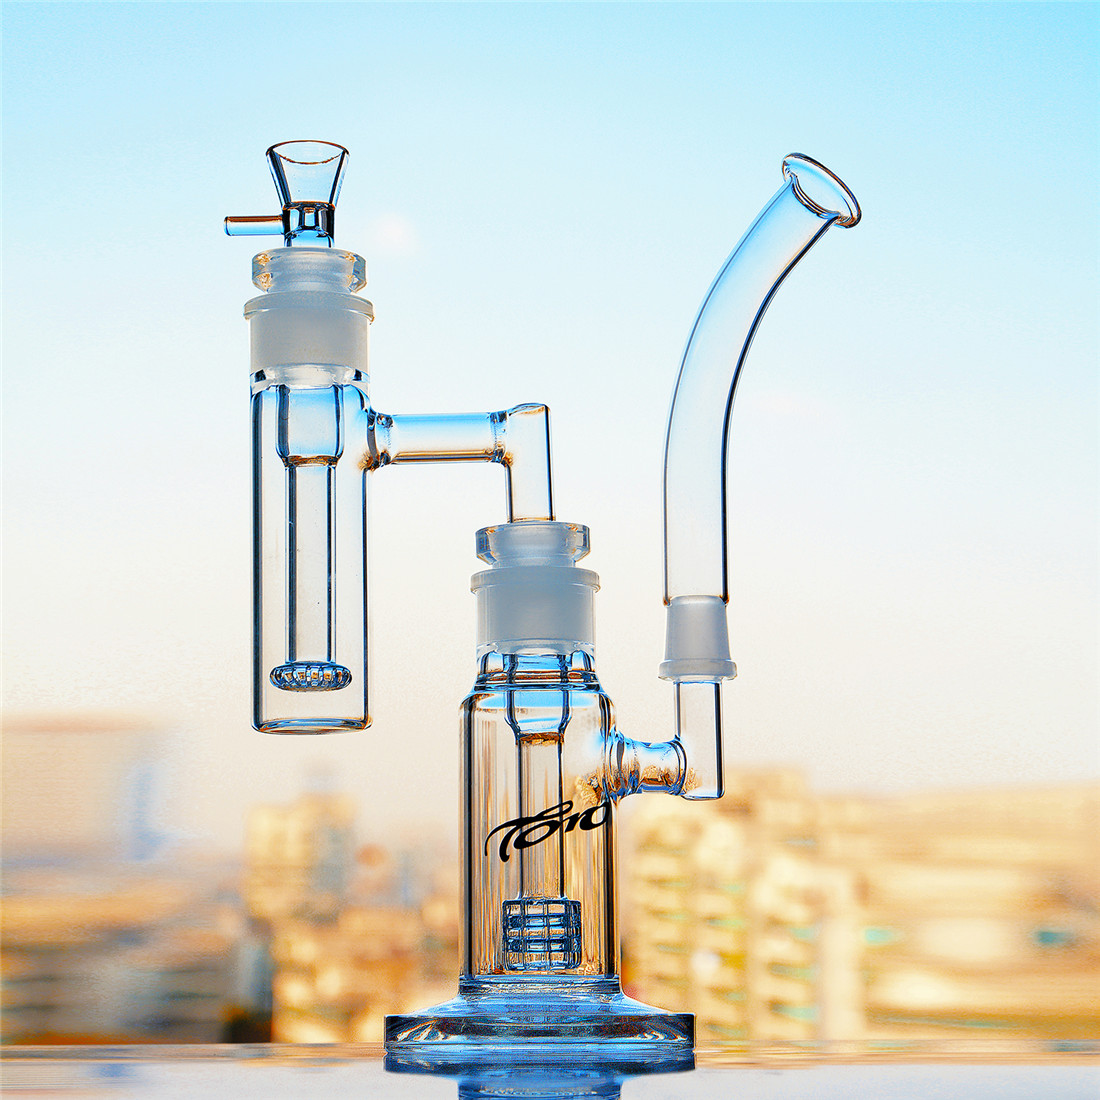 

Large TORO Hookah Bong with Percolator Birdcage Inline Perc Recycler Oil Rig Glass Bongs Smoking Water Pipes with 18mm Female Joint